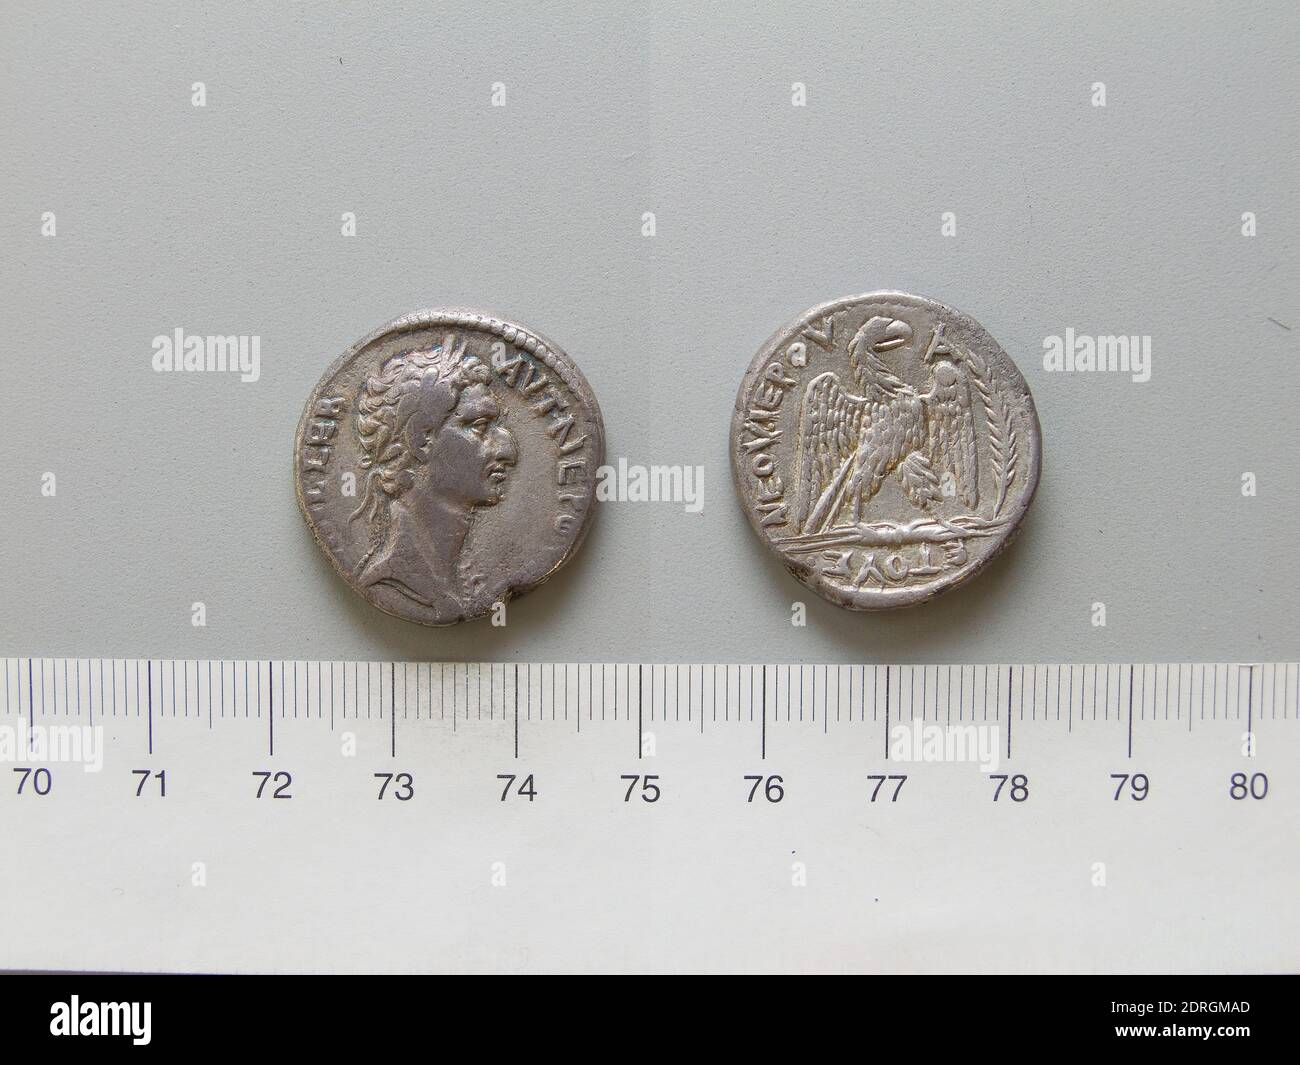 Ruler: Nerva, Emperor of Rome, A.D. 30–98, ruled 96–98, Mint: Antioch, Tetradrachm of Nerva, Emperor of Rome from Antioch, A.D. 96–97, Silver, 14.62 g, 12:00, 25.5 mm, Made in Antioch, Greek, 1st century A.D., Numismatics Stock Photo